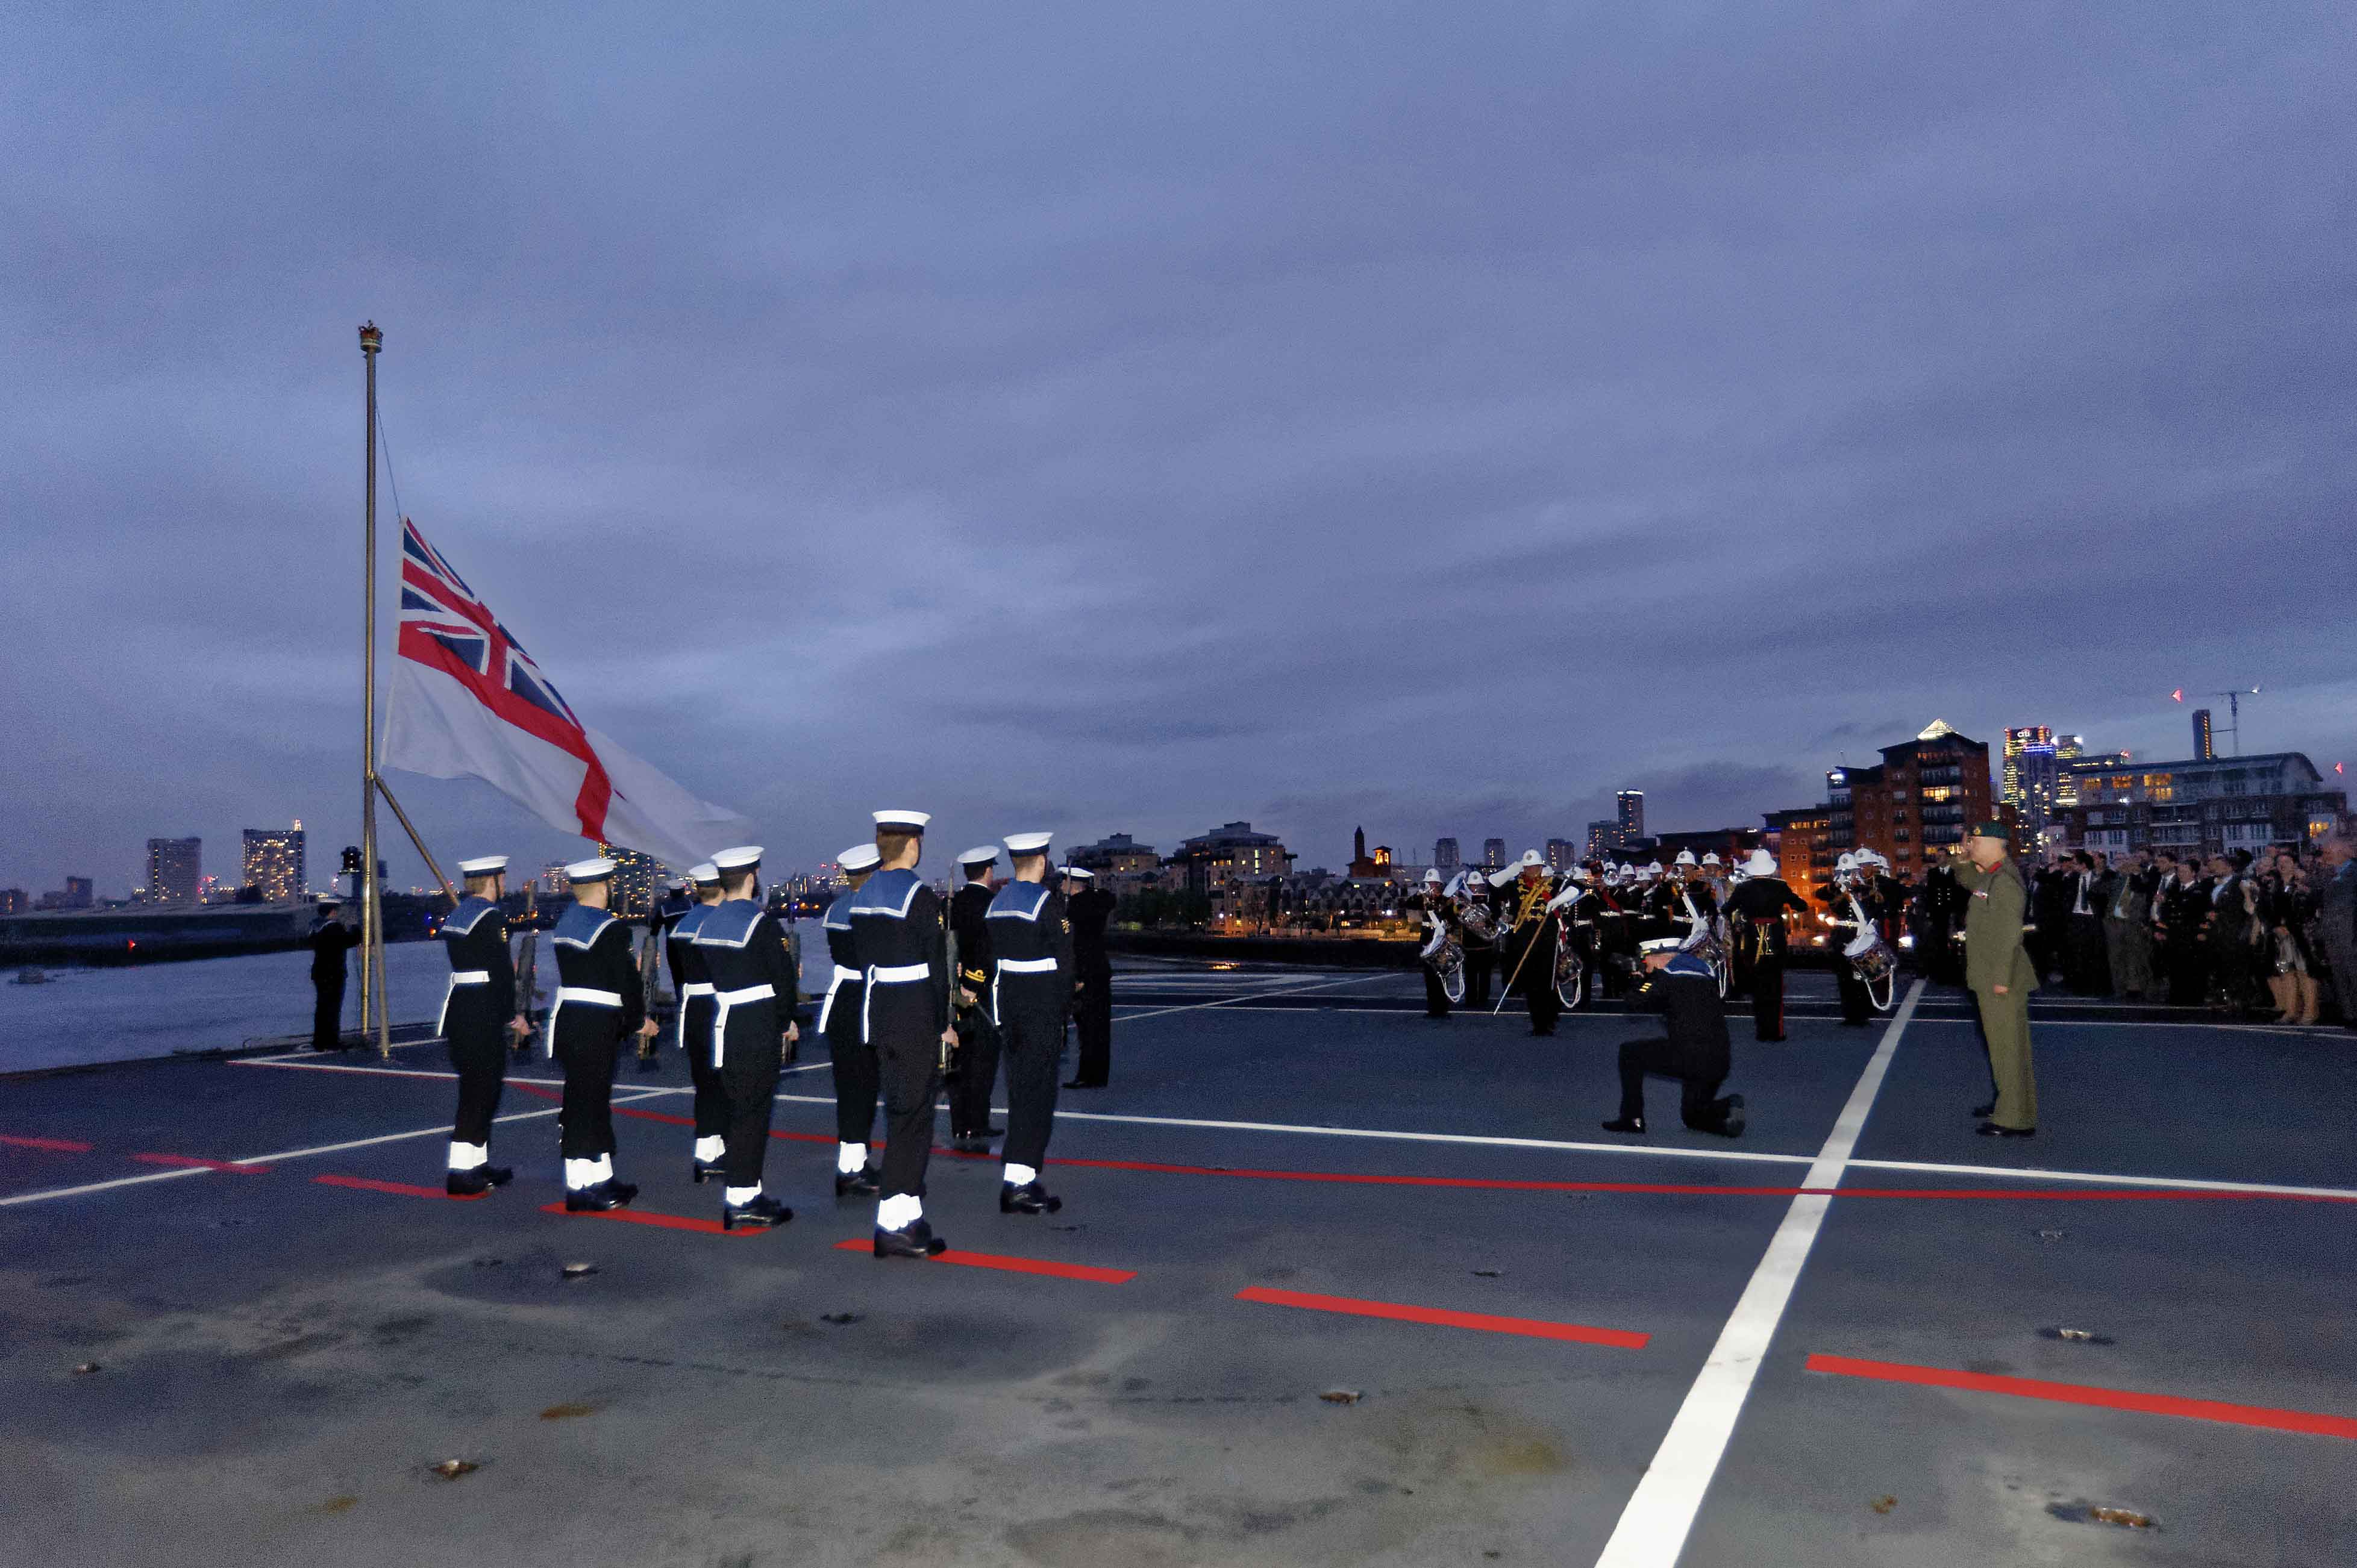 Sunset Ceremony On Board HMS Ocean at the Greenwich Royal Naval College